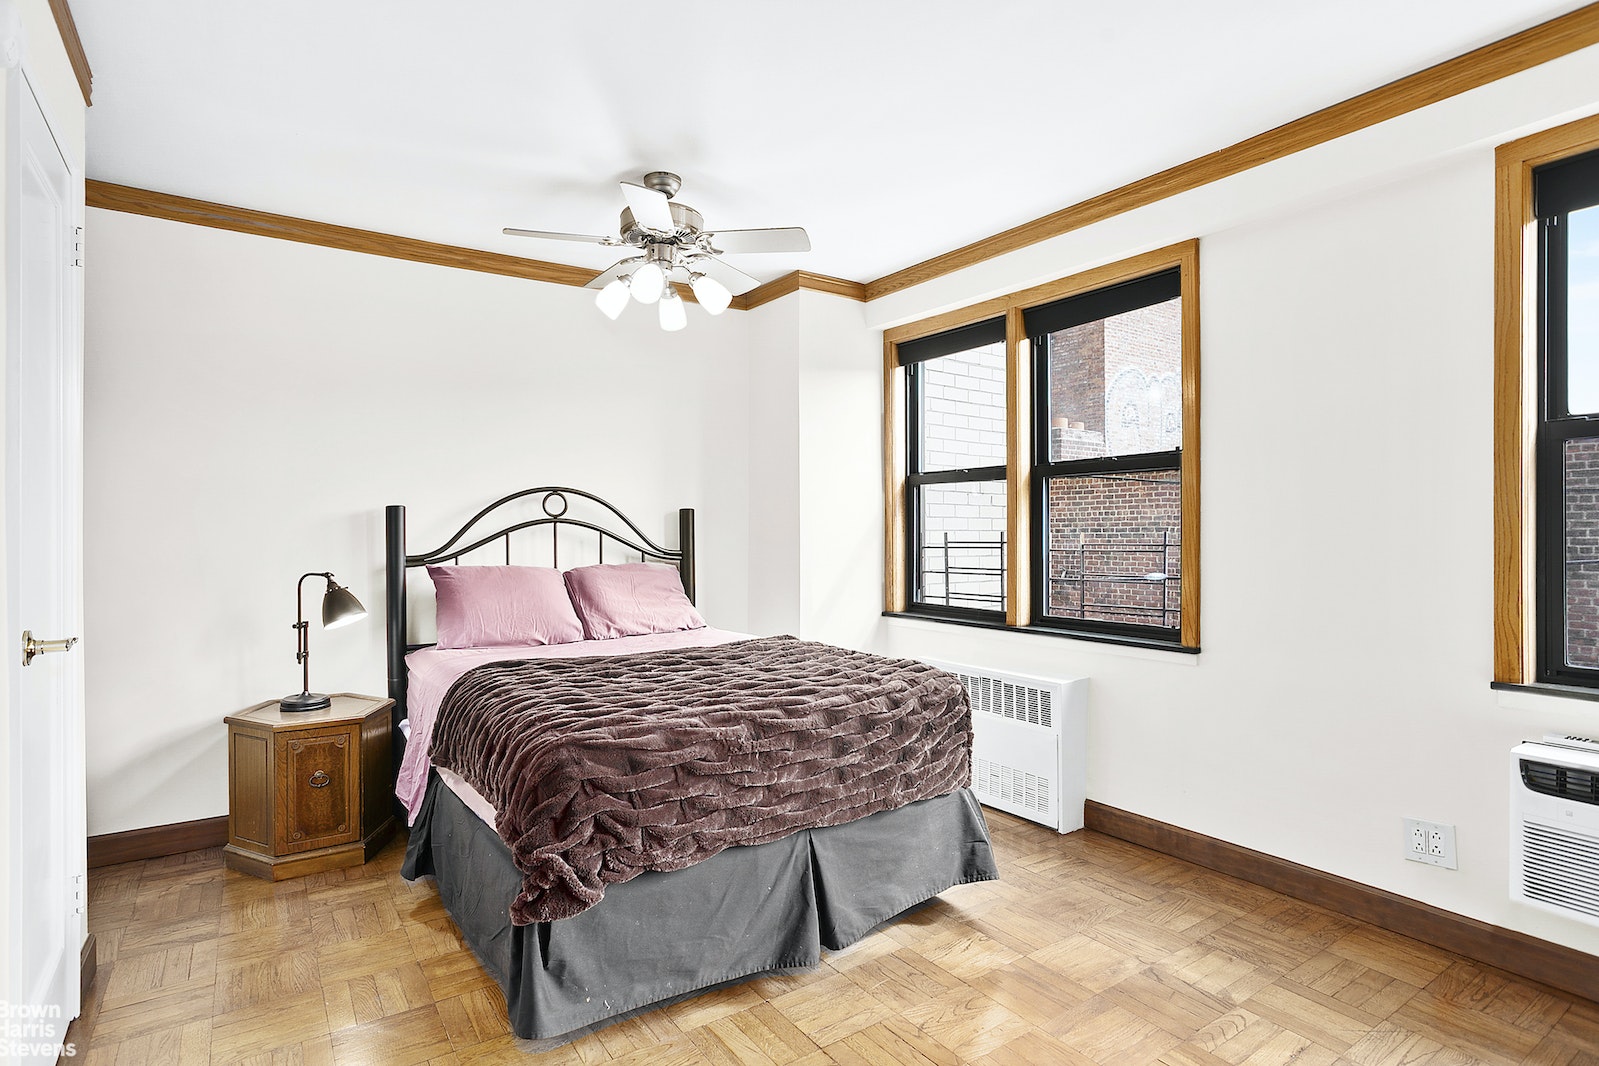 37-31 73rd Street 2H Jackson Heights Queens NY 11372